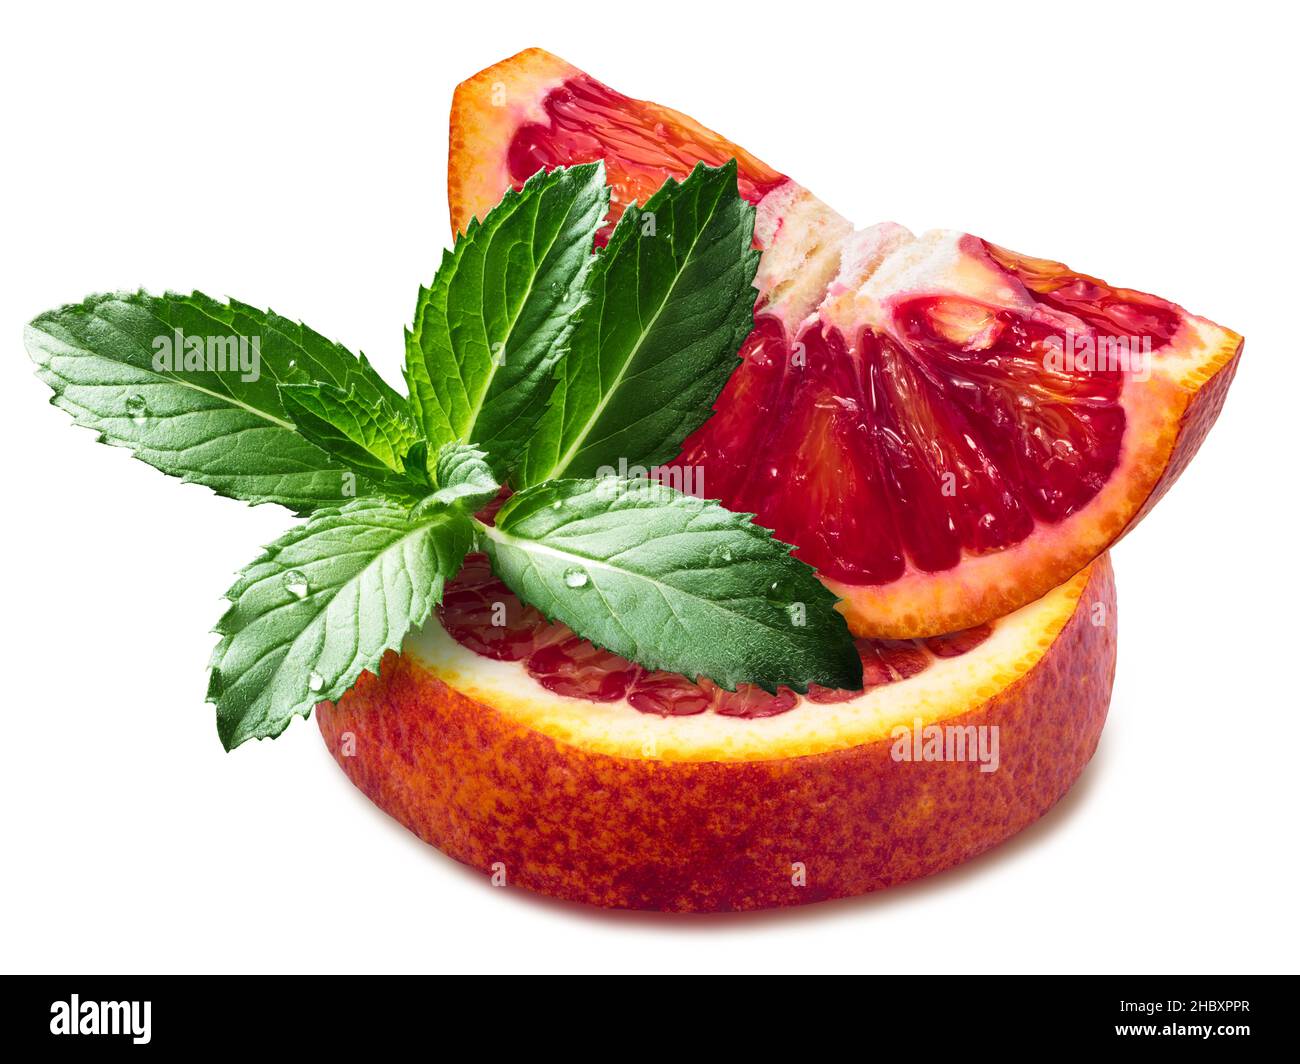 Blood orange slices with fresh spearmint leaves isolated Stock Photo